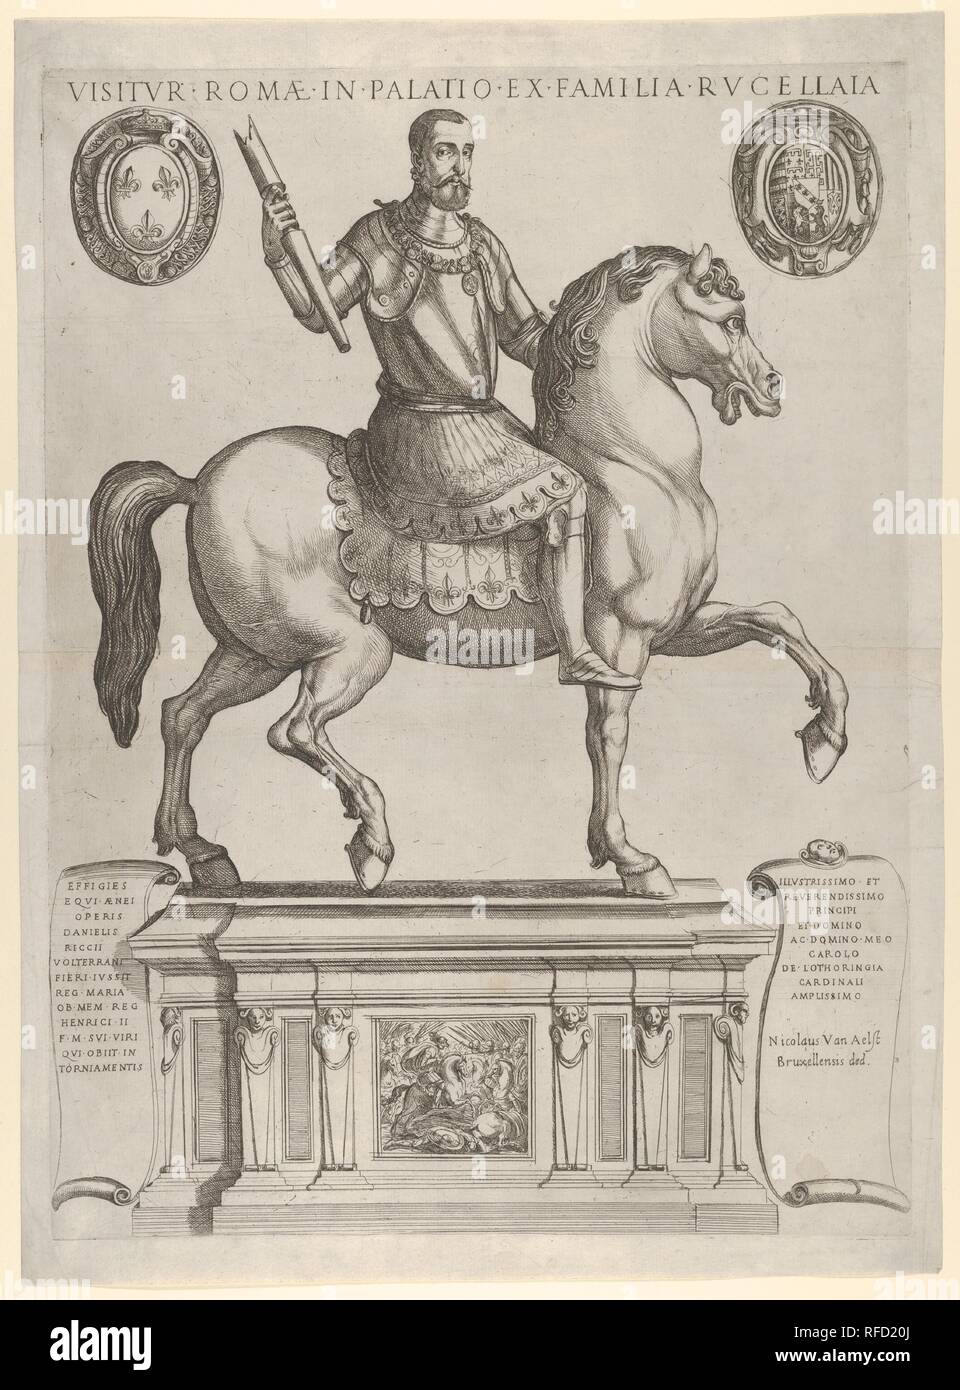 Equestrian Statue of Henry II, King of France, in the Palazzo Rucellai by Daniele de Volterra. Artist: Antonio Tempesta (Italian, Florence 1555-1630 Rome); After Daniele da Volterra (Daniele Ricciarelli) (Italian, Volterra 1509-1566 Rome). Dimensions: sheet: 15 3/4 x 20 1/2 in. (40 x 52 cm)  plate: 12 x 15 3/4 in. (30.5 x 40 cm). Publisher: Nicolaus van Aelst (Flemish, Brussels 1526-1613 Rome). Date: Published early 17th century. Museum: Metropolitan Museum of Art, New York, USA. Stock Photo